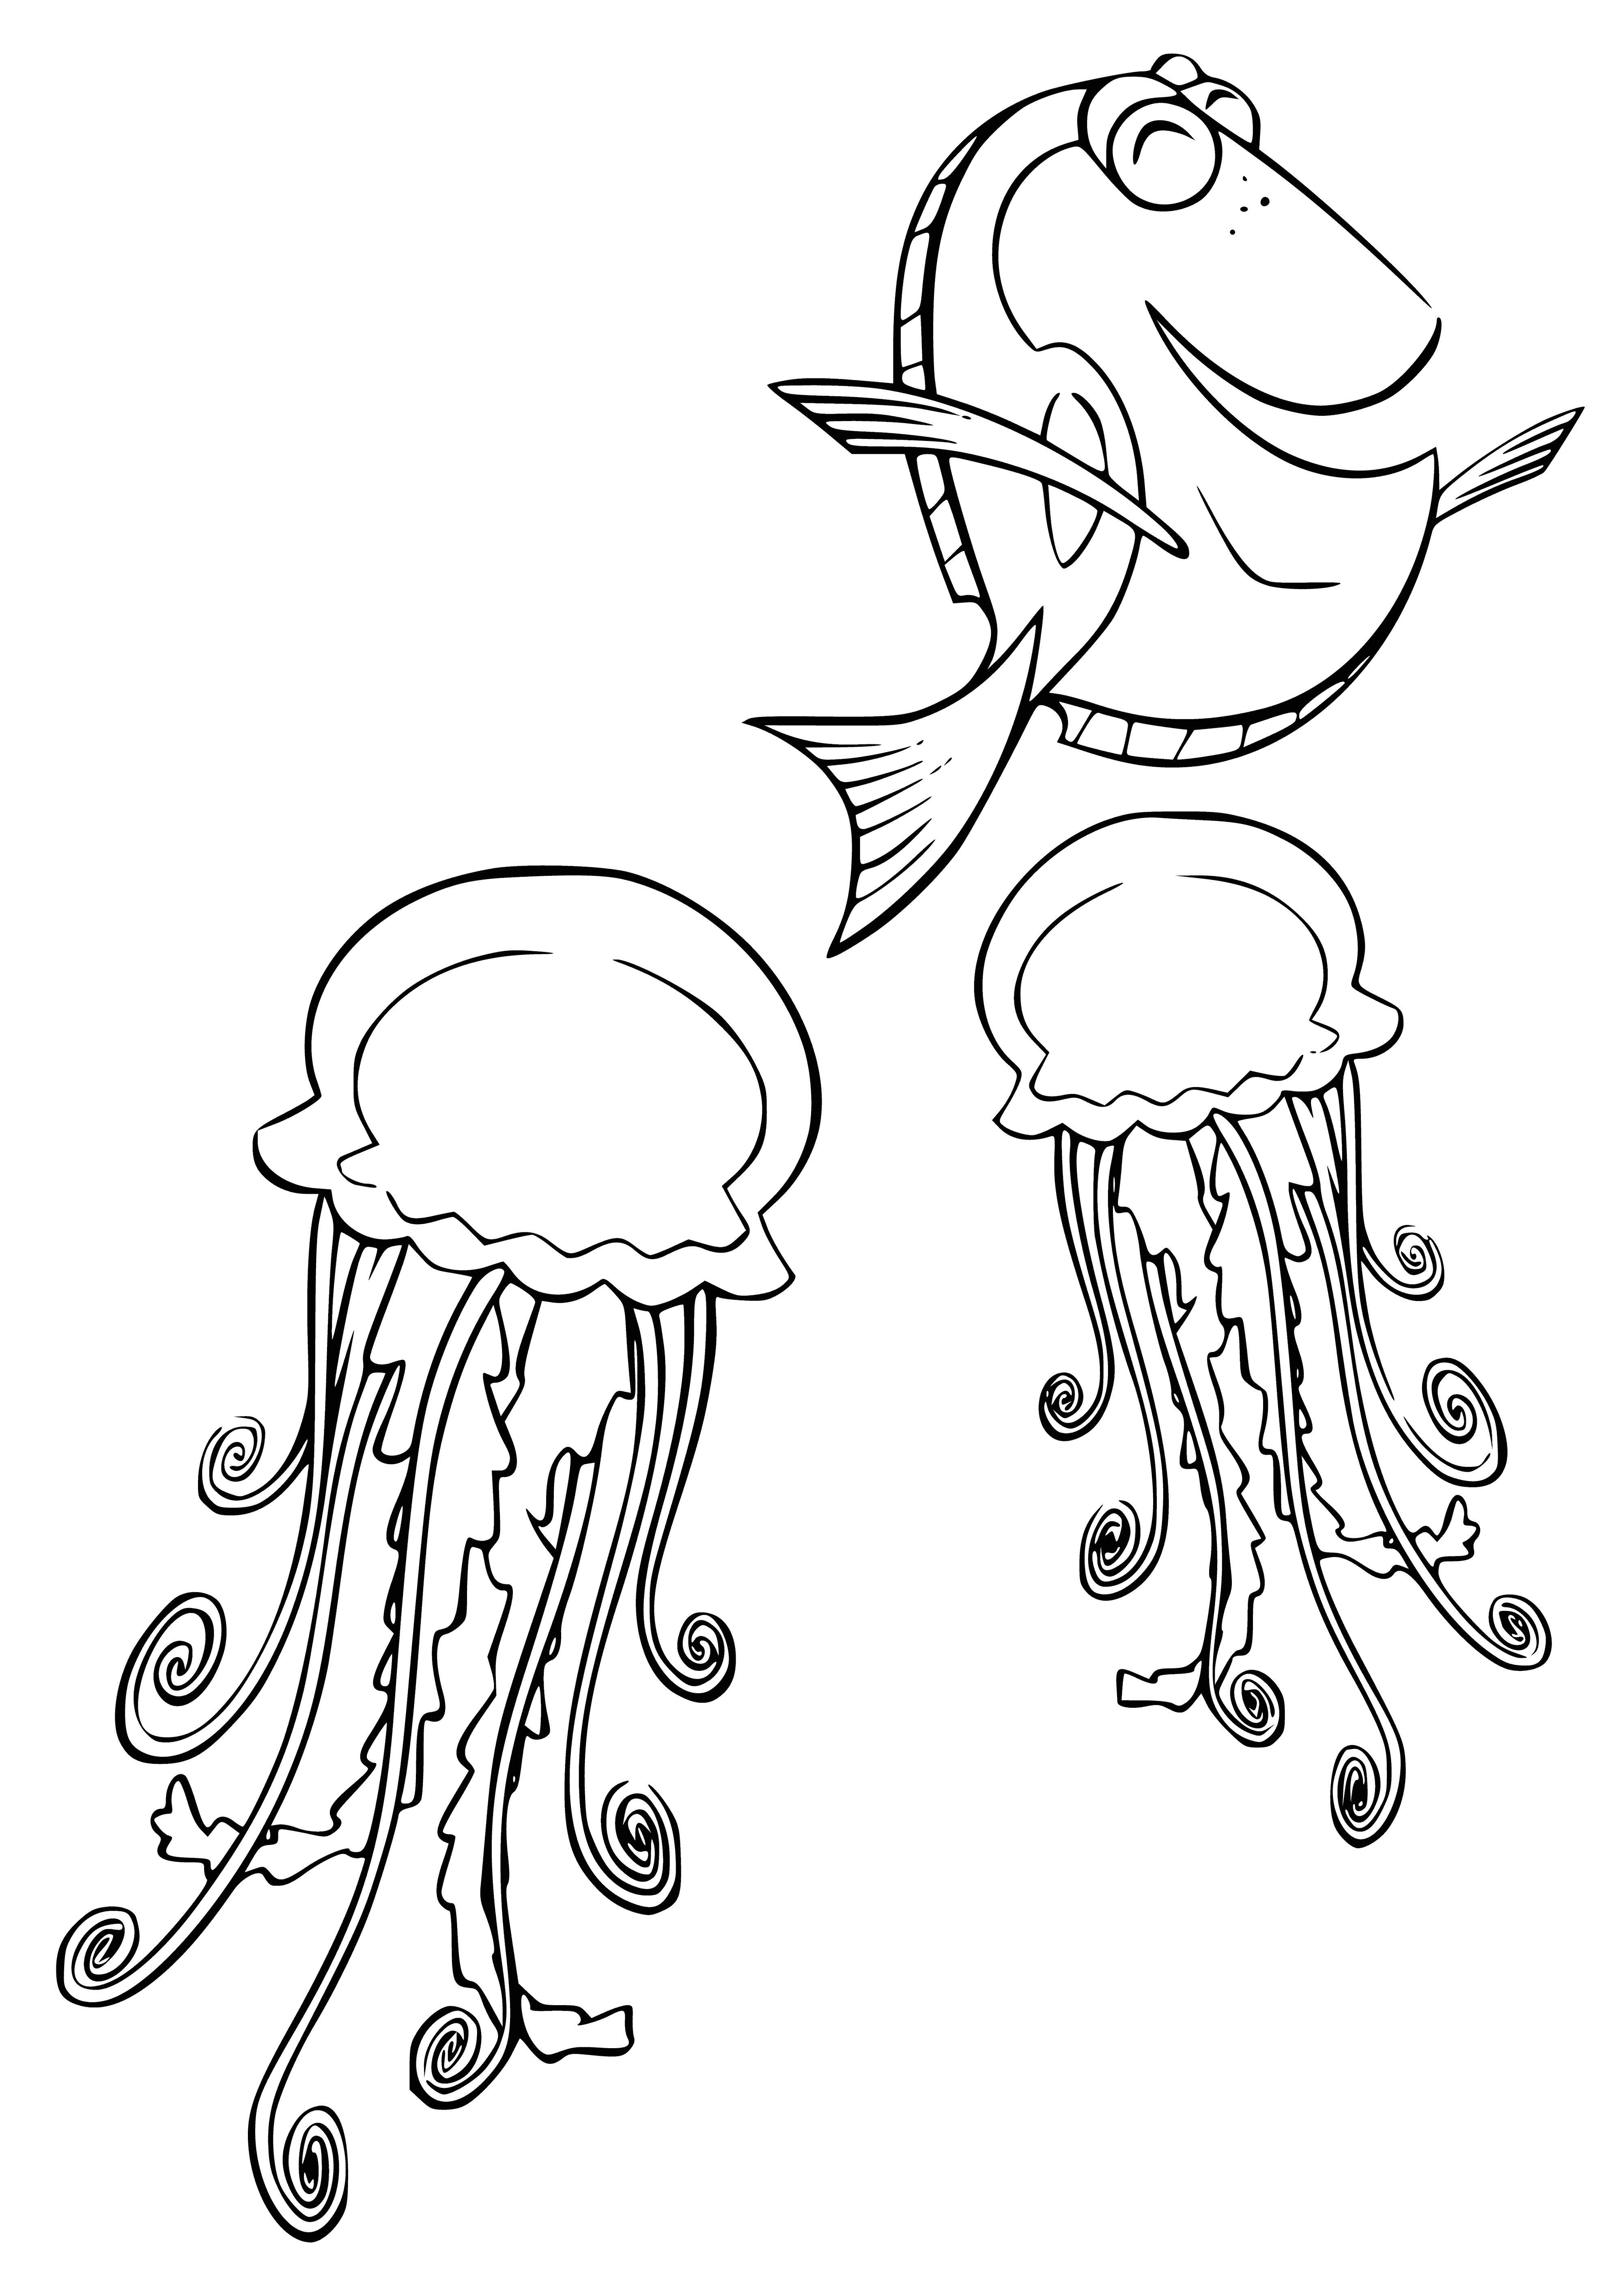 coloring page: Dory and a jellyfish swim in a coloring page; Dory is swimming and the jellyfish is floating.